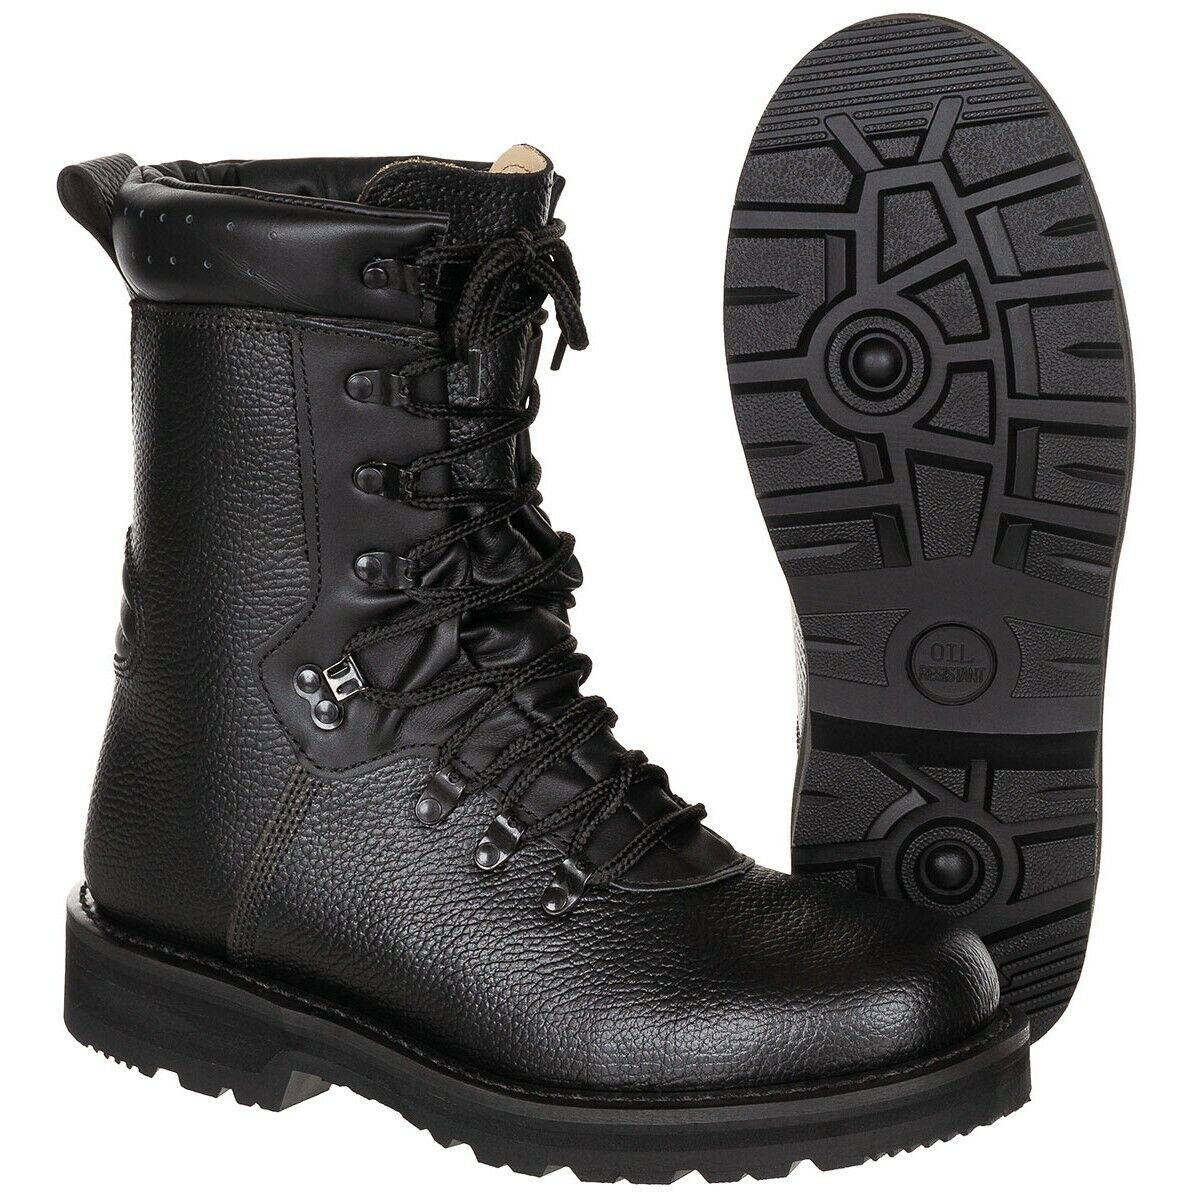 BW combat boots model 2000 Bundeswehr application boots real leather jumping boots